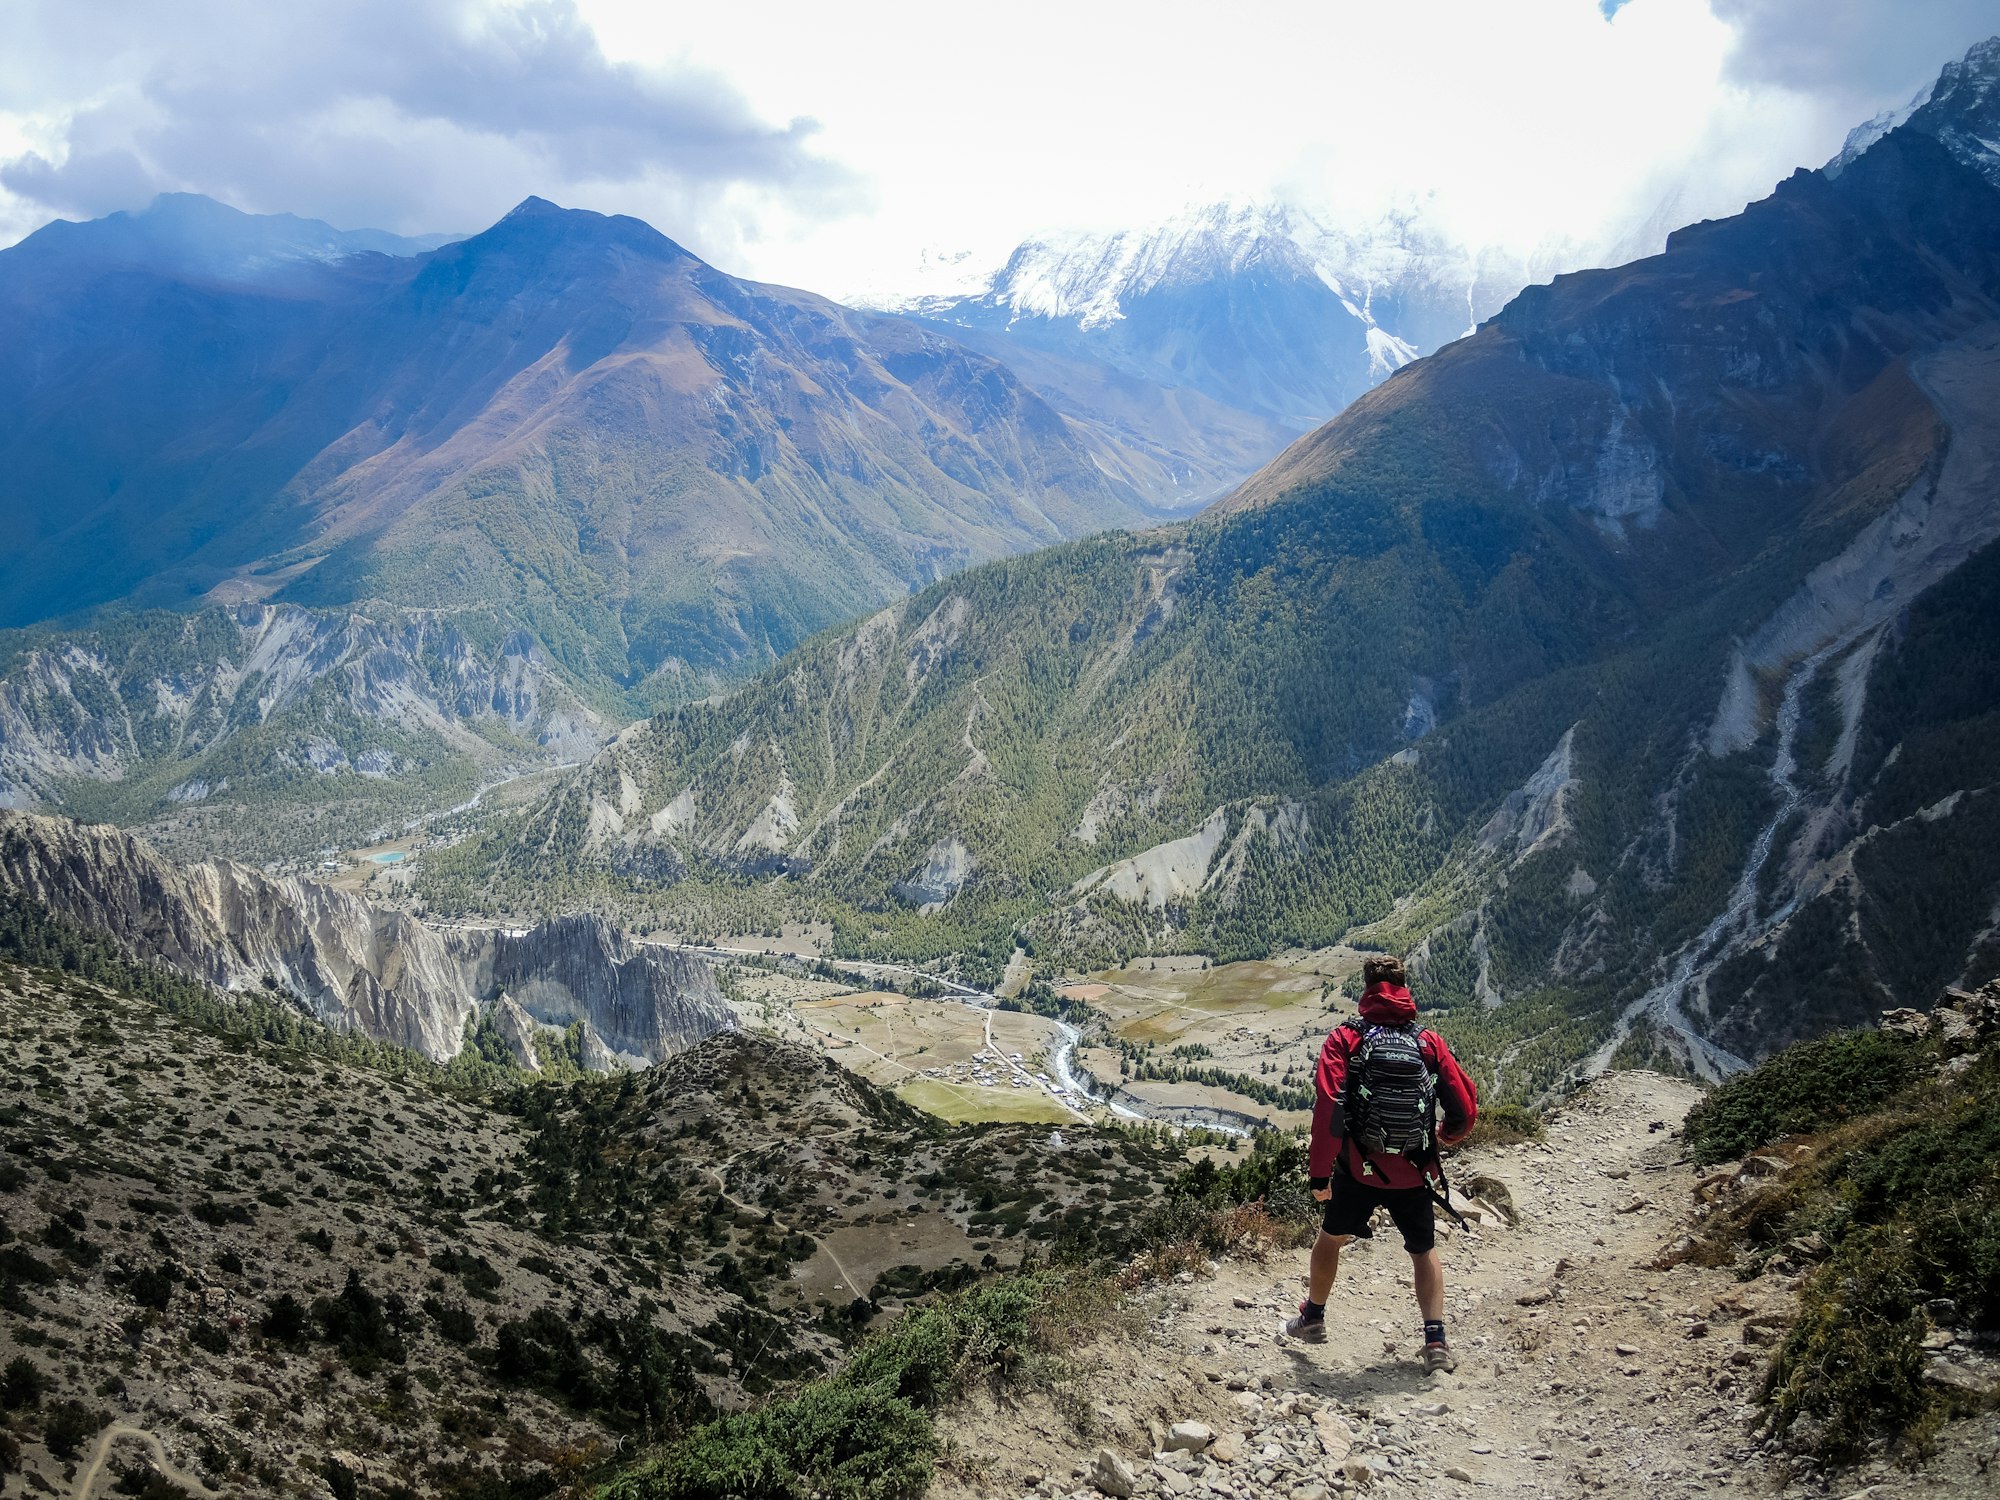 A day hike up from Manang for acclimatisation prior to tackling the Thorung La Pass on the Annapurna Circuit, Nepal.